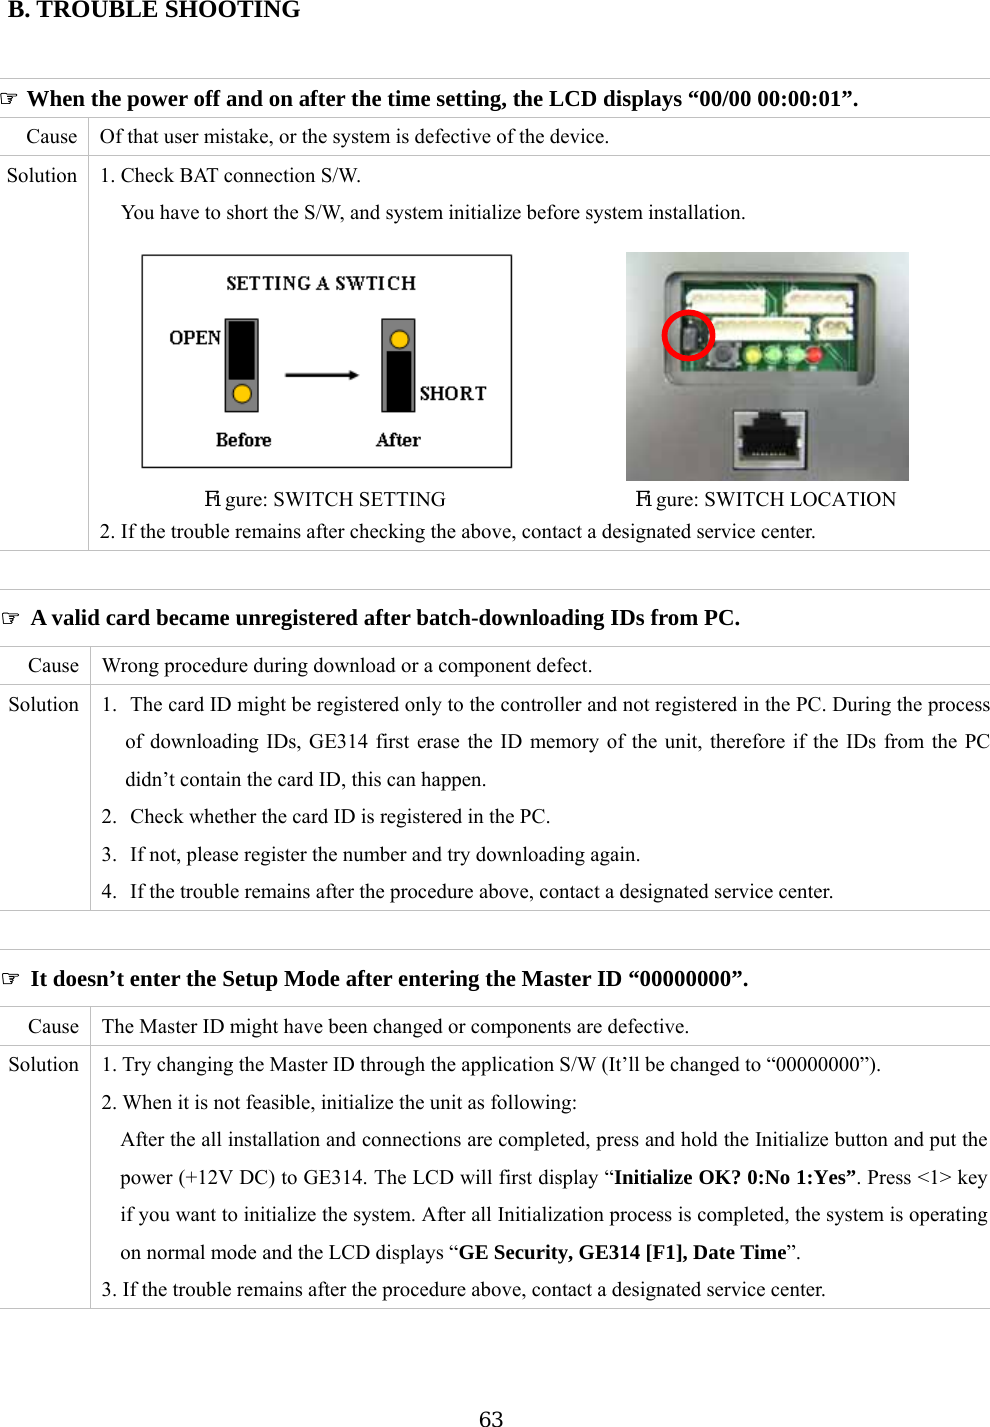 B  ☞ A ed after batch-downloading IDs from PC. . TROUBLE SHOOTING  valid card became unregisterause  Wrong procedure during pon ct. tive of evice. tion  1. Check BAT connection S/You have to short the itialize b                                               C  download or a com ent defeSolution  1.  The card ID might be registered only to the controller and not registered in the PC. During the process 314 first erase the ID memory of the unit, therefore if the IDs from the PC didn’2.  Check whether the card ID is registered in the PC. 3.  If not, please register the number and try downloading again. 4.  If the trouble remains after the procedure above, contact a designated service center. of downloading IDs, GEt contain the card ID, this can happen.    ☞ It doesn’t enter the Setup Mode after entering the Master ID “00000000”. Cause  The Master ID might have been changed or components are defective. Solution  1. Try changing the Master ID through the application S/W (It’ll be changed to “00000000”). 2. When it is not feasible, initialize the unit as following:   After the all installation and connections are completed, press and hold the Initialize button and put the power (+12V DC) to GE314. The LCD will first display “Initialize OK? 0:No 1:Yes”. Press &lt;1&gt; key if you want to initialize the system. After all Initialization process is completed, the system is operating on normal mode and the LCD displays “GE Security, GE314 [F1], Date Time”. 3. If the trouble remains after the procedure above, contact a designated service center.    ☞ When the power off and on after the time setting, the LCD displays “00/00 00:00:01”.   Cause  Of that user mistake, or the system is defec  the dSolu W.    S/W, and system in efore system installation.    Figure: SWITCH SETTING                  Figure: SWITCH LOCATION 2. If the trouble remains after checking the above, contact a designated service center.   63